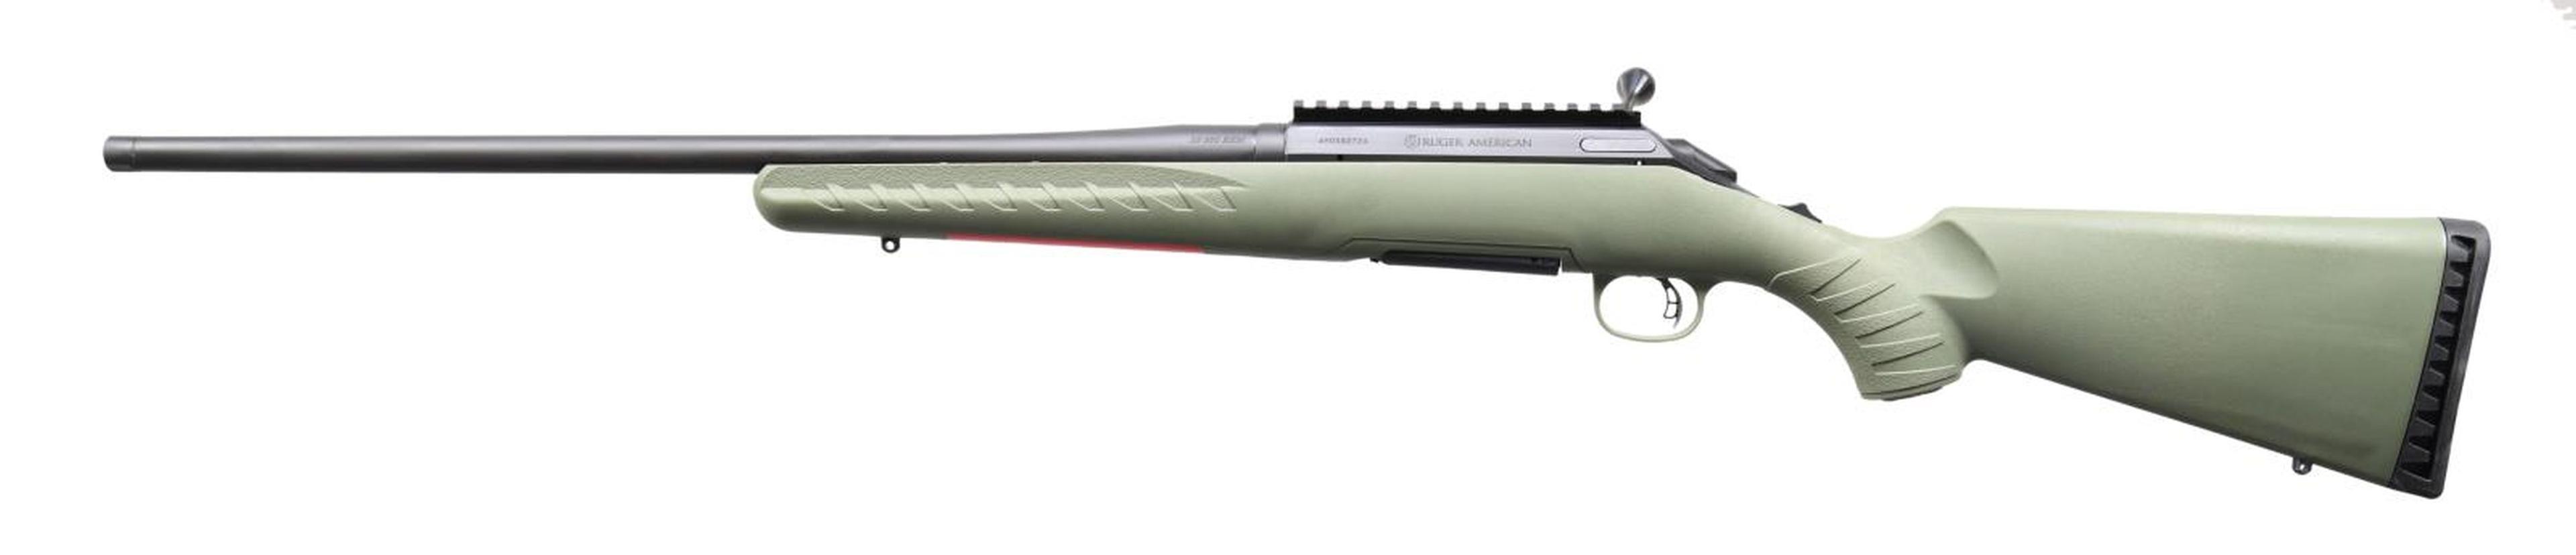 RUGER 22-250 AMERICAN PREDATOR BOLT ACTION RIFLE.